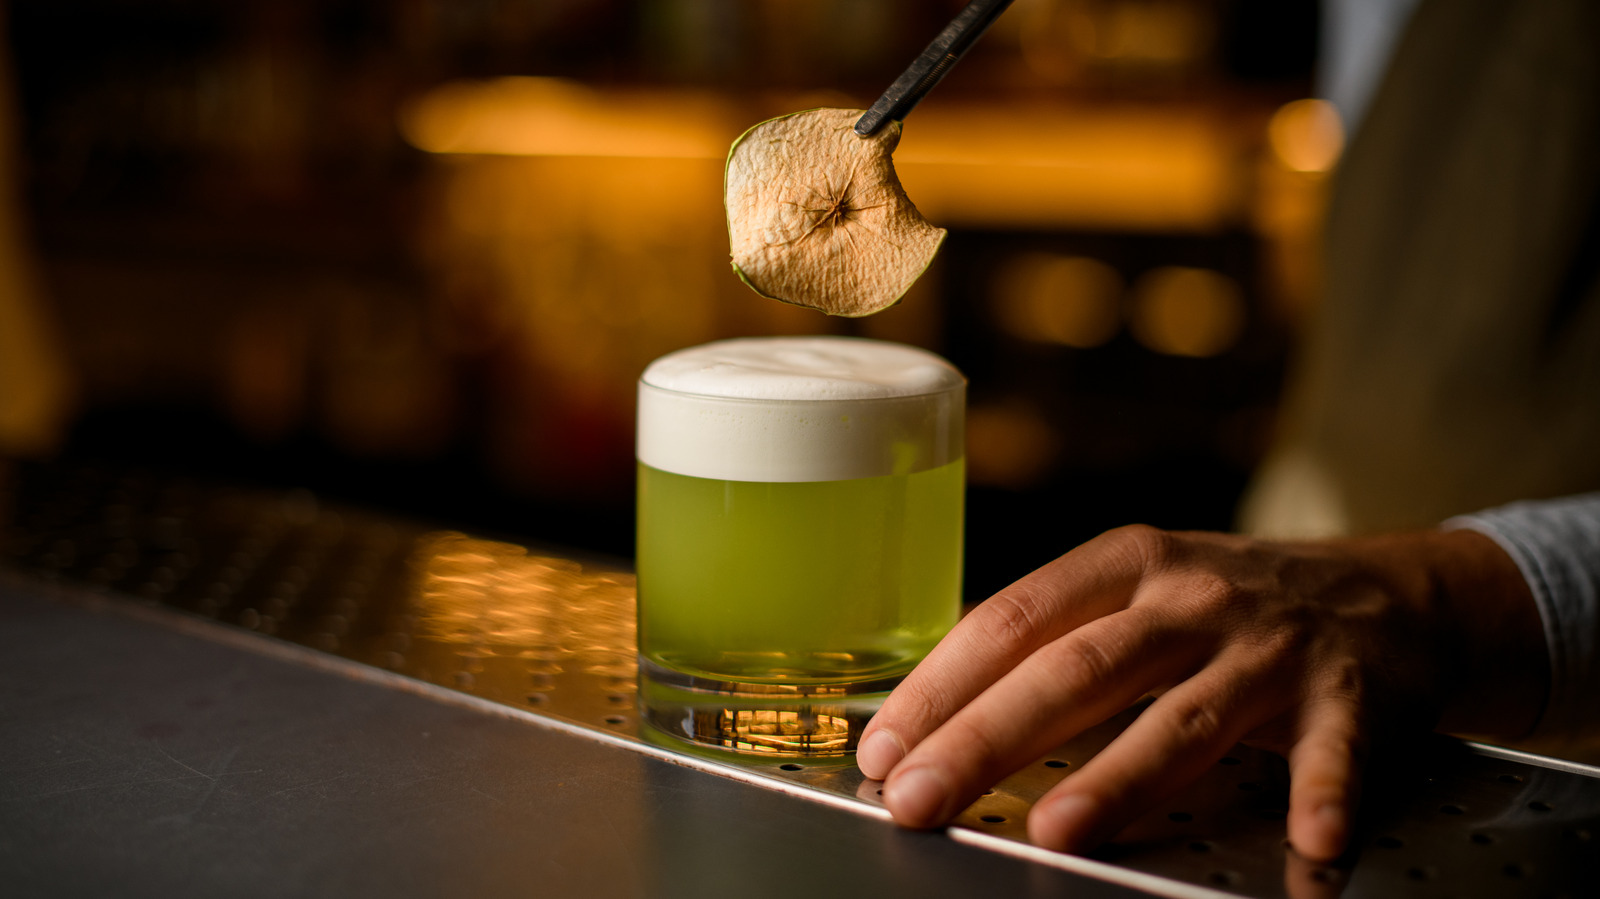 https://www.tastingtable.com/img/gallery/does-the-foam-in-cocktails-actually-serve-a-purpose/l-intro-1677332158.jpg